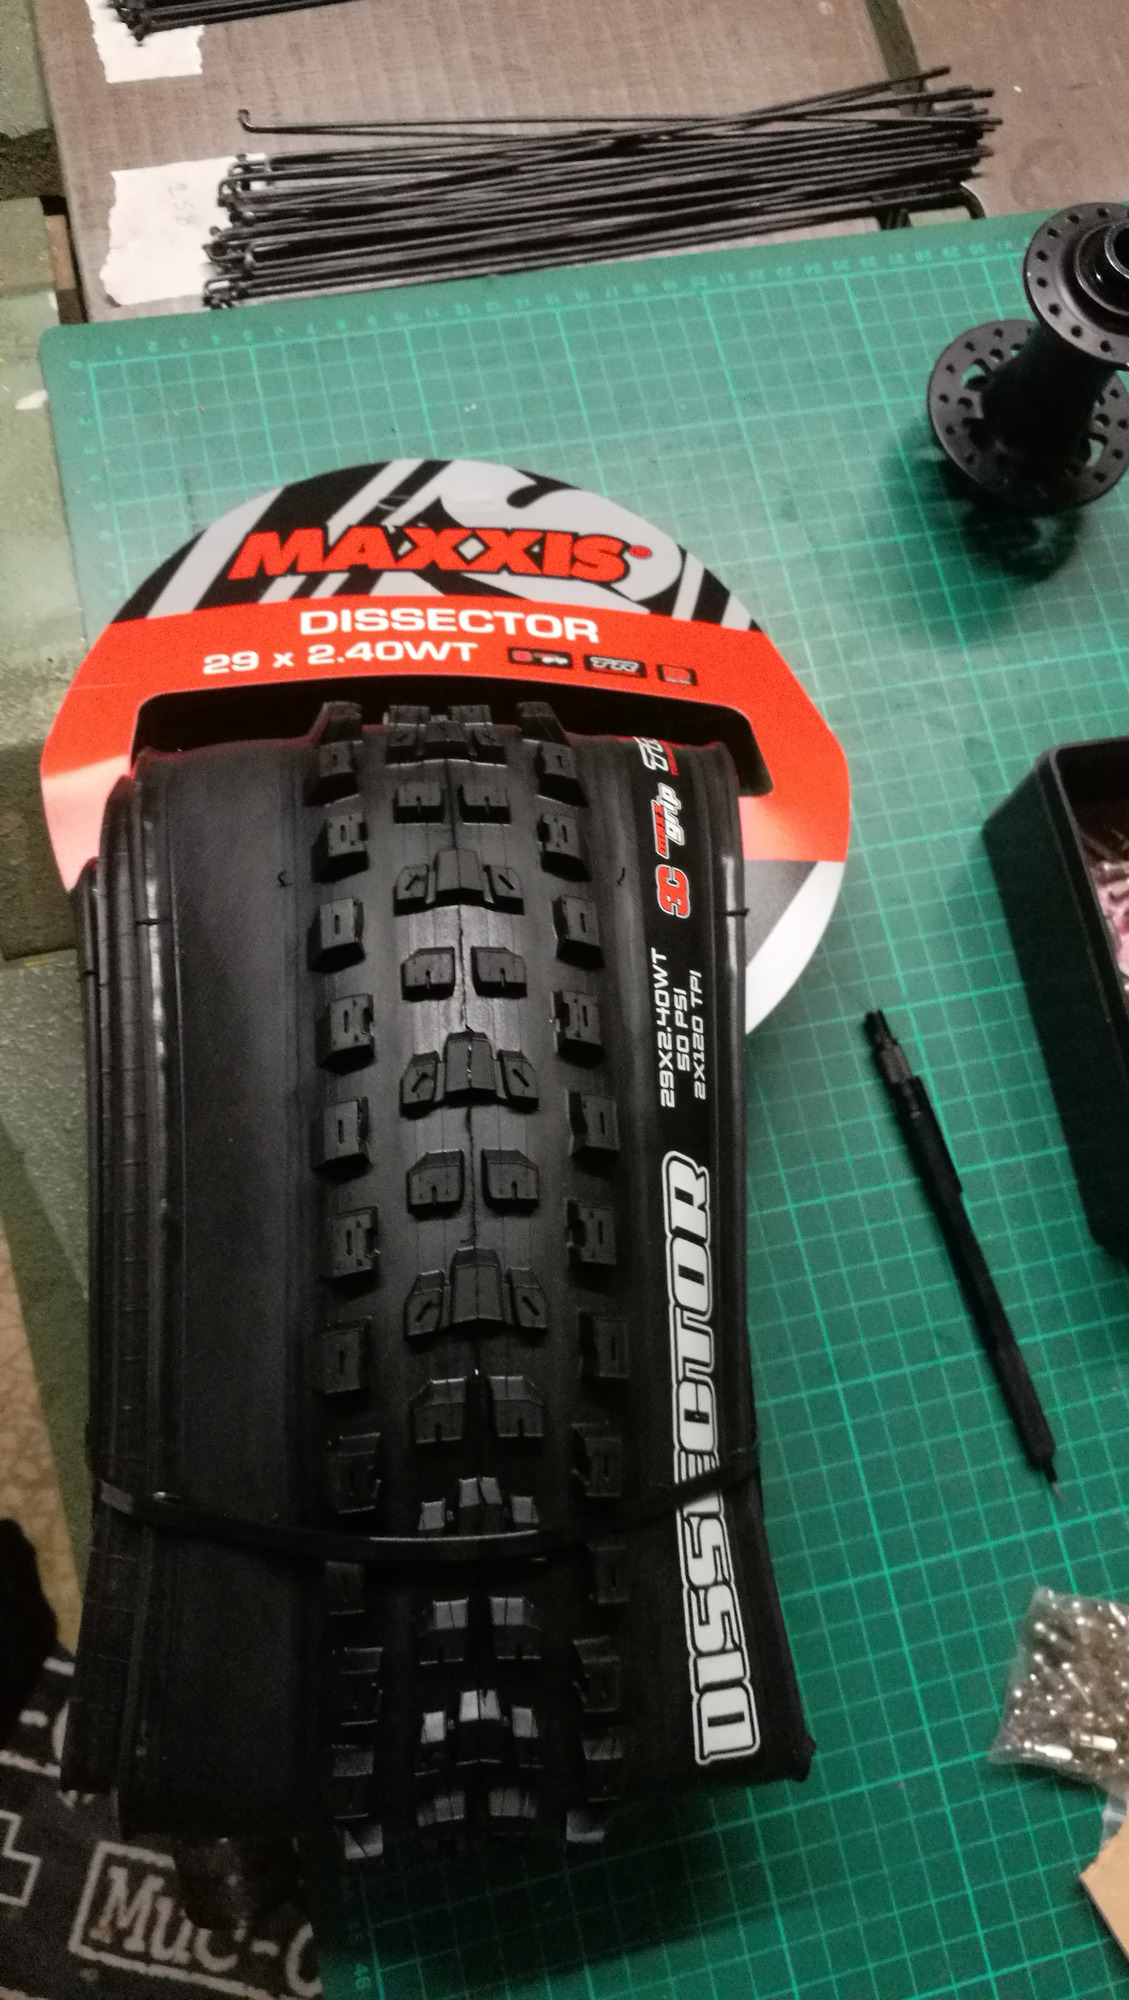 MAXXIS Dissector